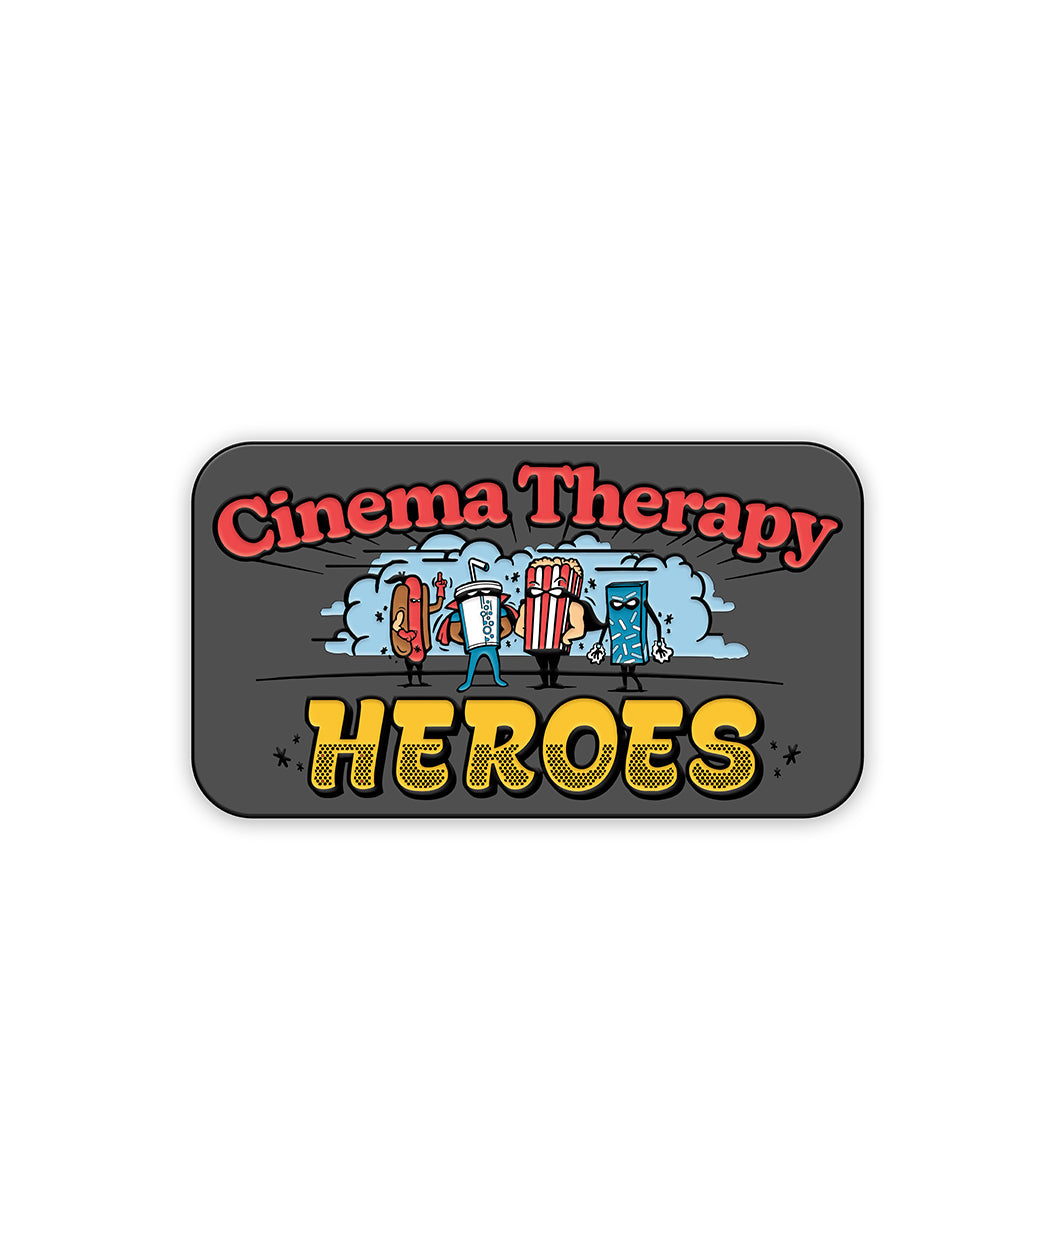 Cinema Therapy Heroes (Patreon) logo with soda and pops characters. Heroes deserve badges, wear it with pride!